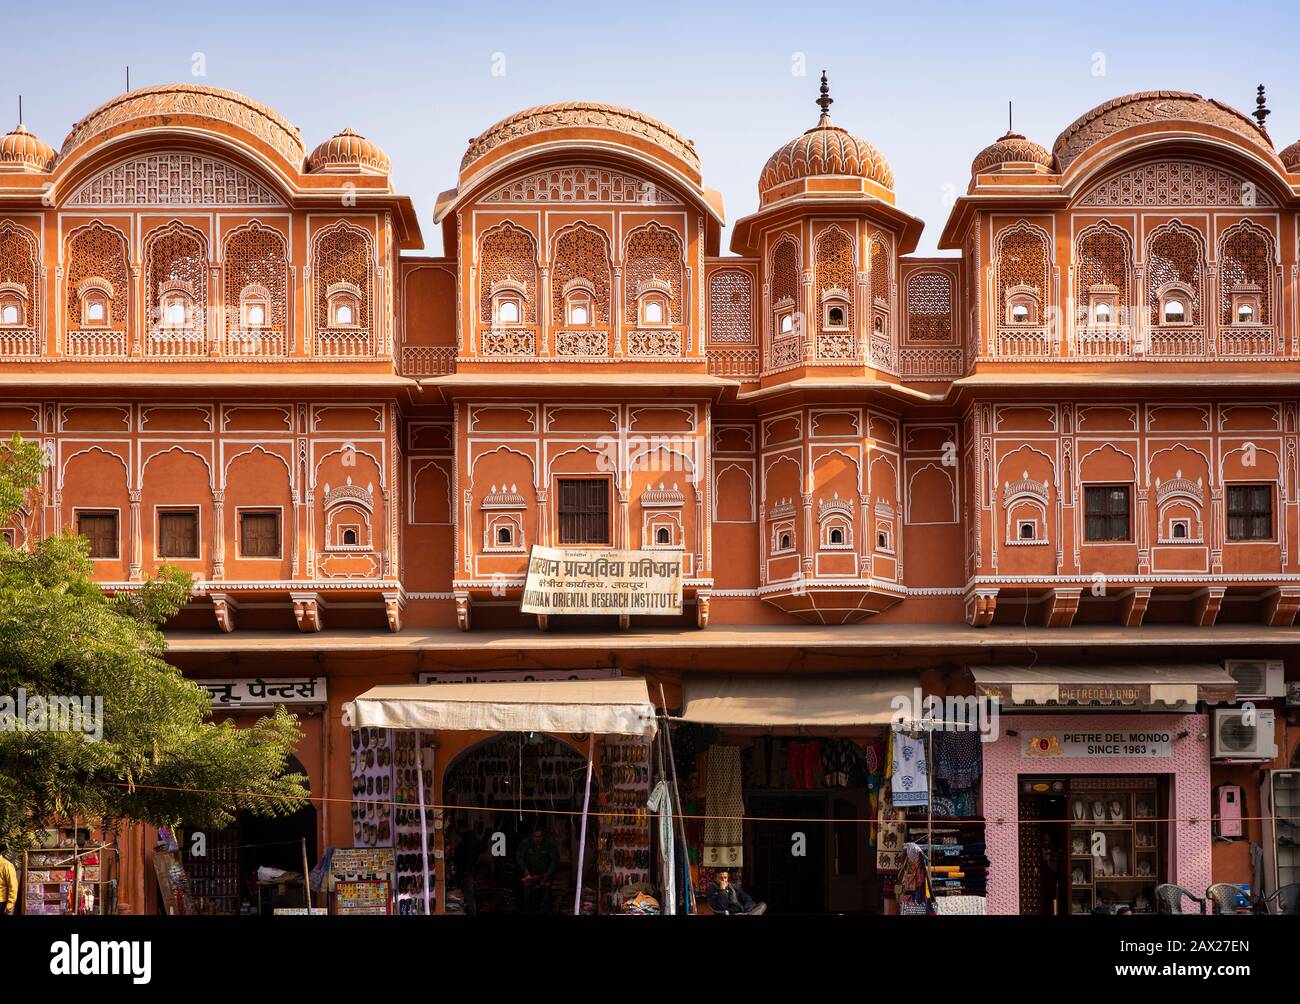 India, Rajasthan, Jaipur, Hawa Mahal Road, architectural detail of building opposite Royal Palace compound Stock Photo